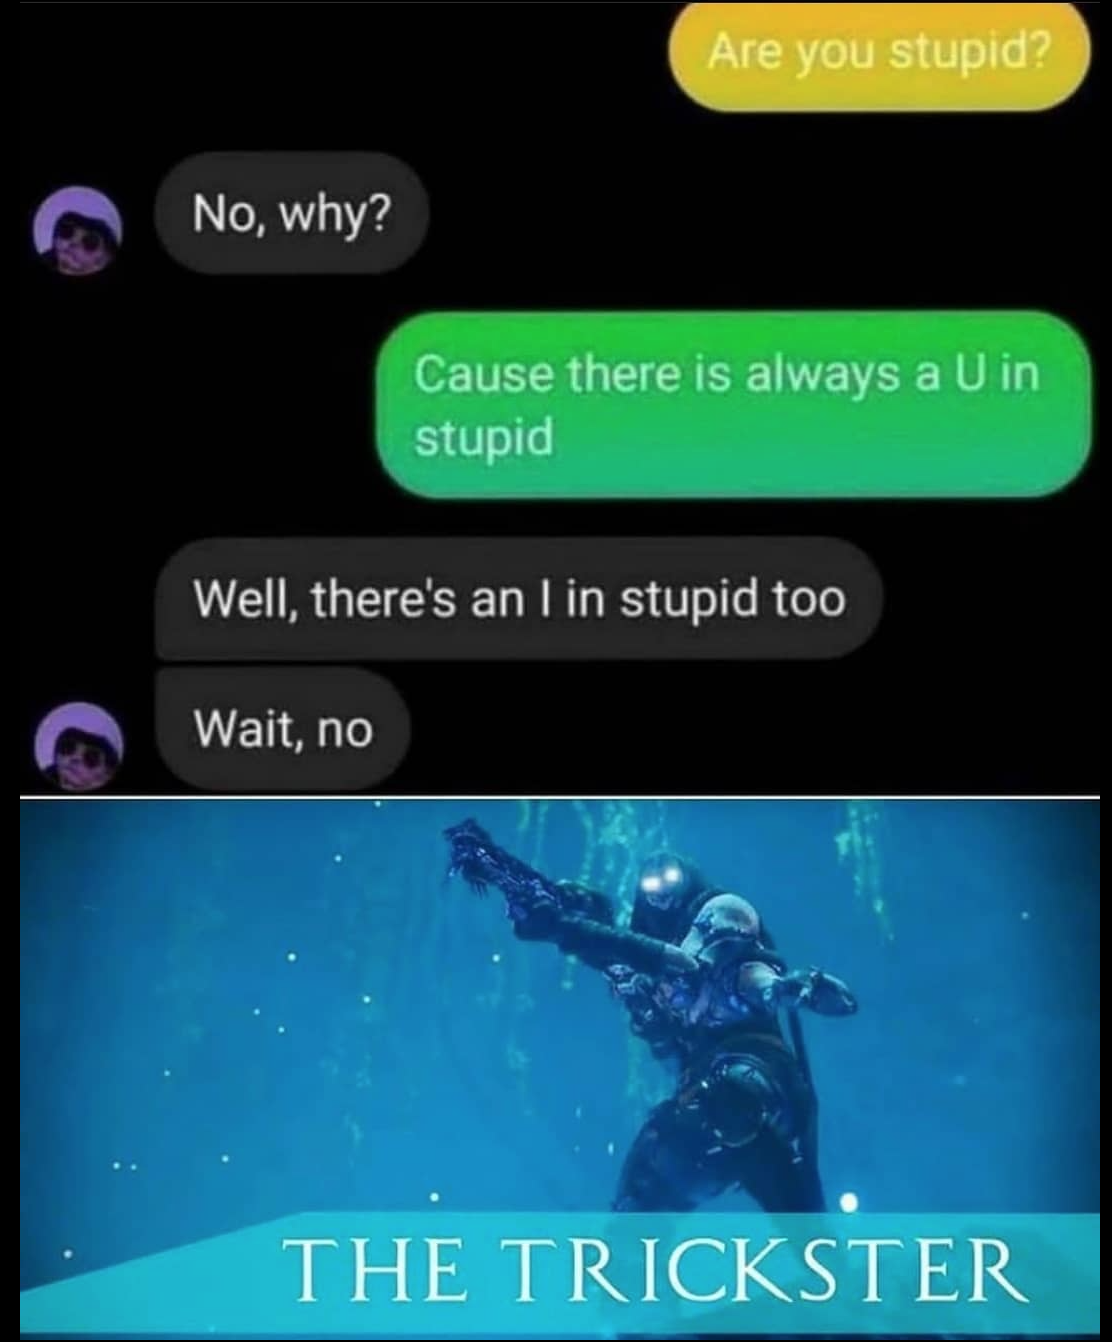 funny gaming memes - water - Are you stupid? No, why? Cause there is always a U in stupid Well, there's an I in stupid too Wait, no The Trickster